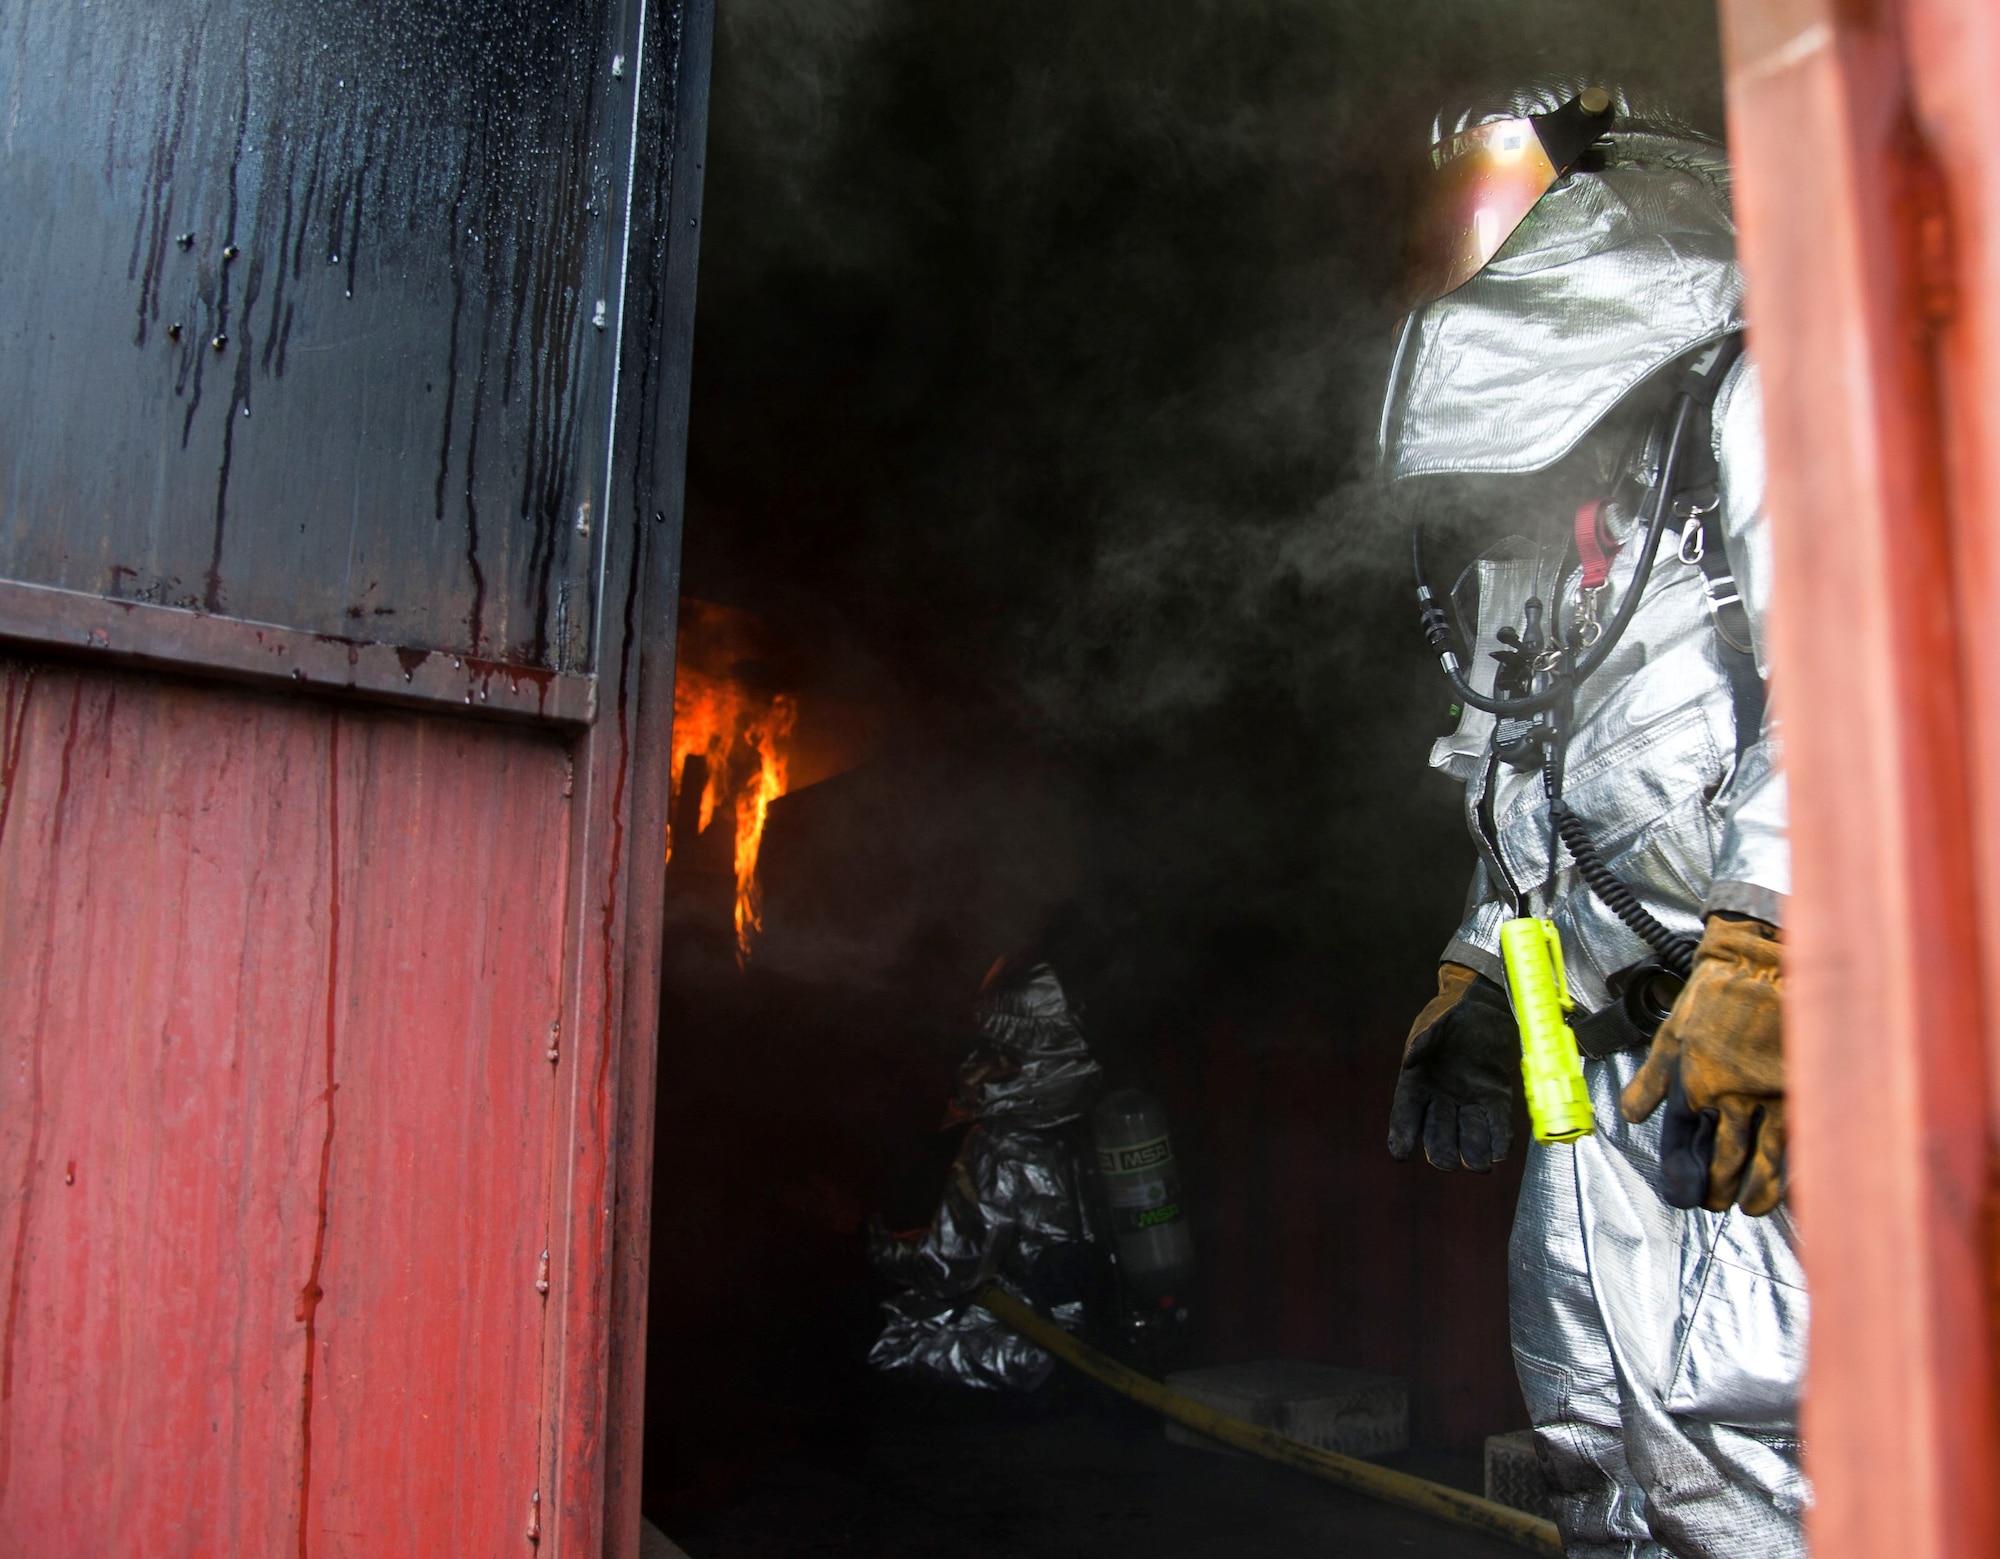 A fire burns bright inside the flashover simulator July 30, 2013, at Yokota Air Base, Japan. Marine Corps Air Station Iwakuni firefighters visited Yokota AB for joint training on recognizing and safely evading flashovers. (U.S. Air Force photo/Airman 1st Class Soo C. Kim)